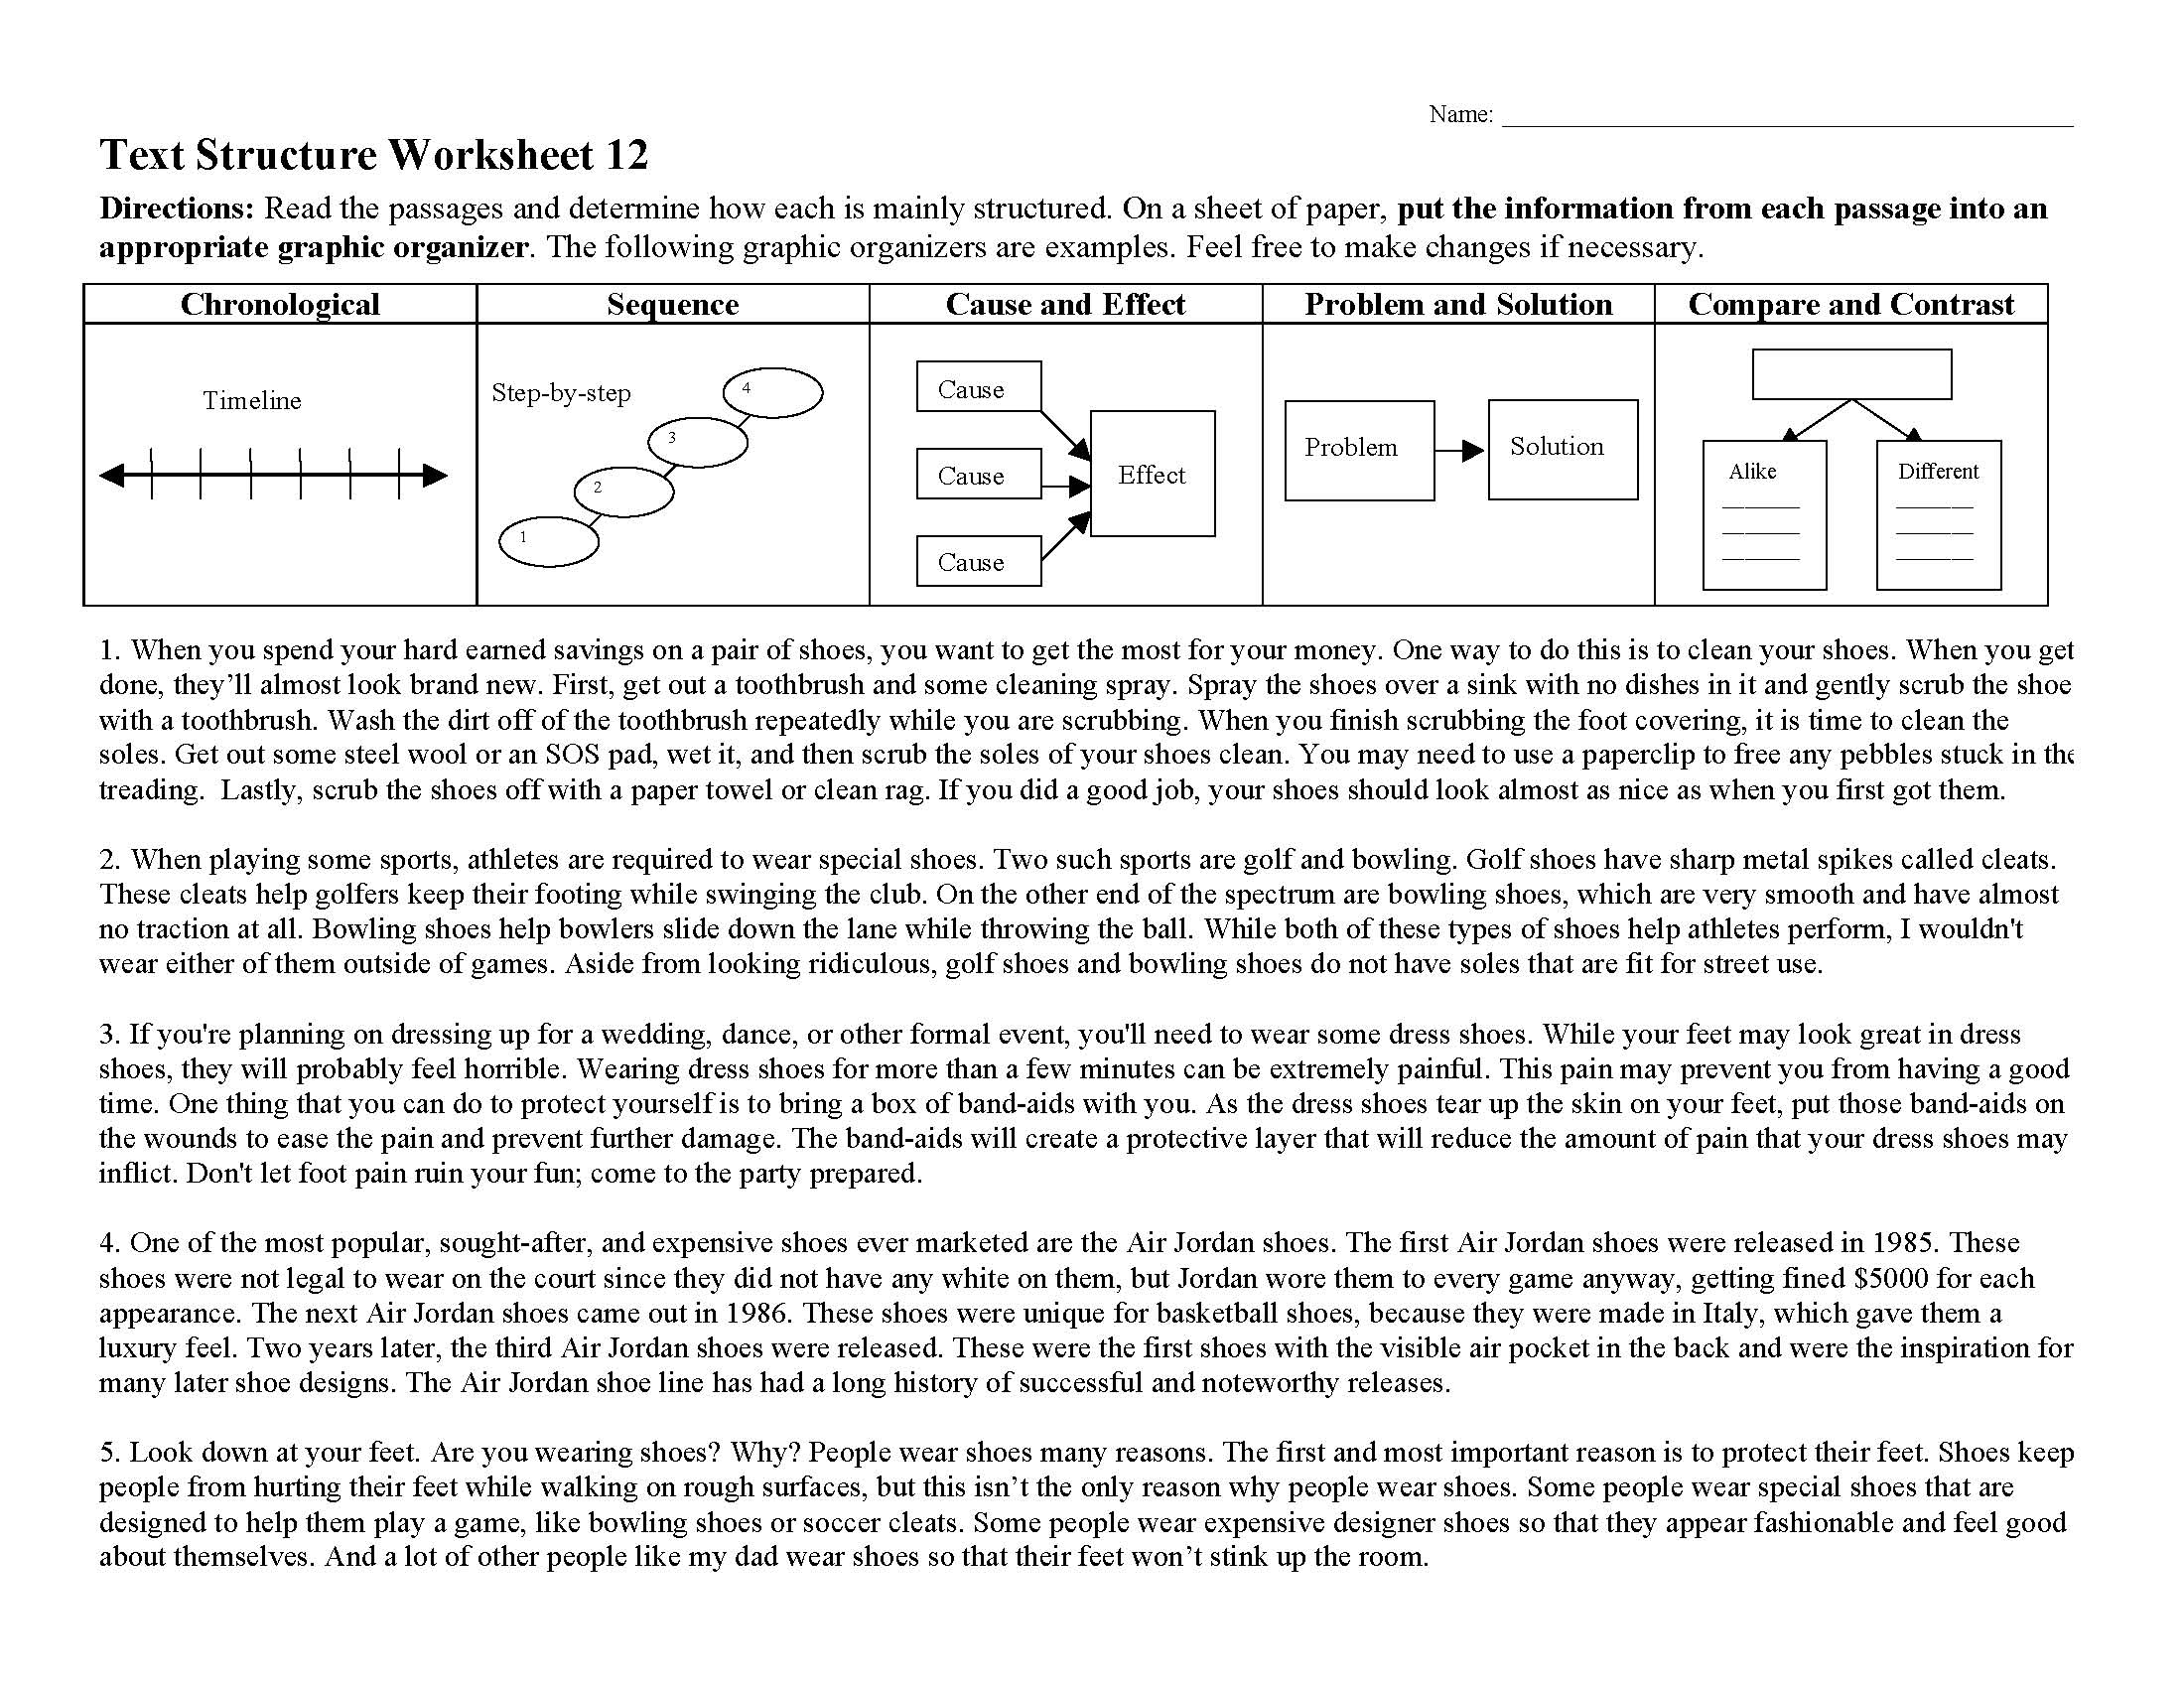 This is a preview image of the Text Structure Worksheet 12.